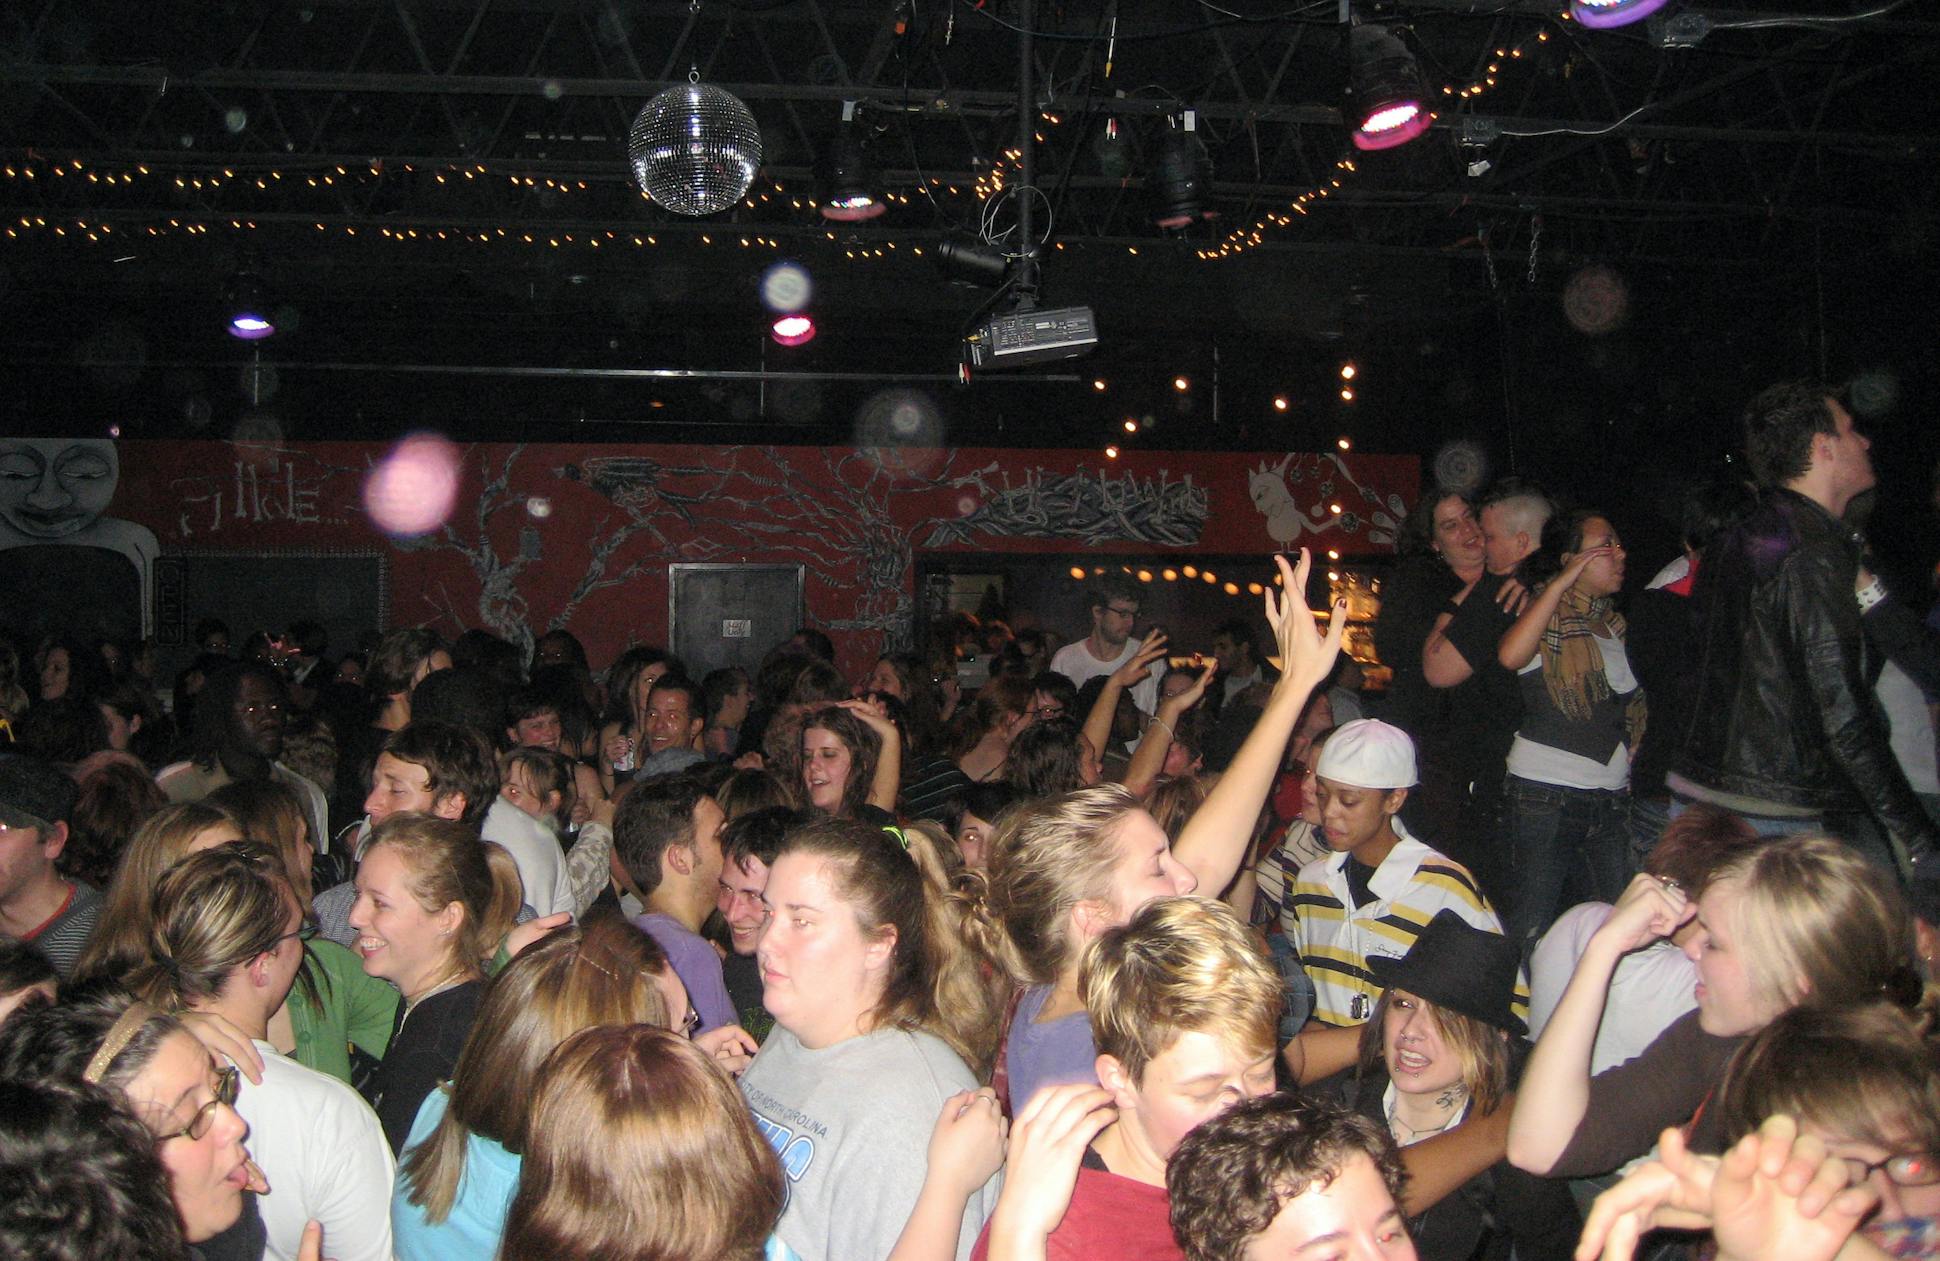 The crowd danced on Pi Bar's last night in business in November 2008.